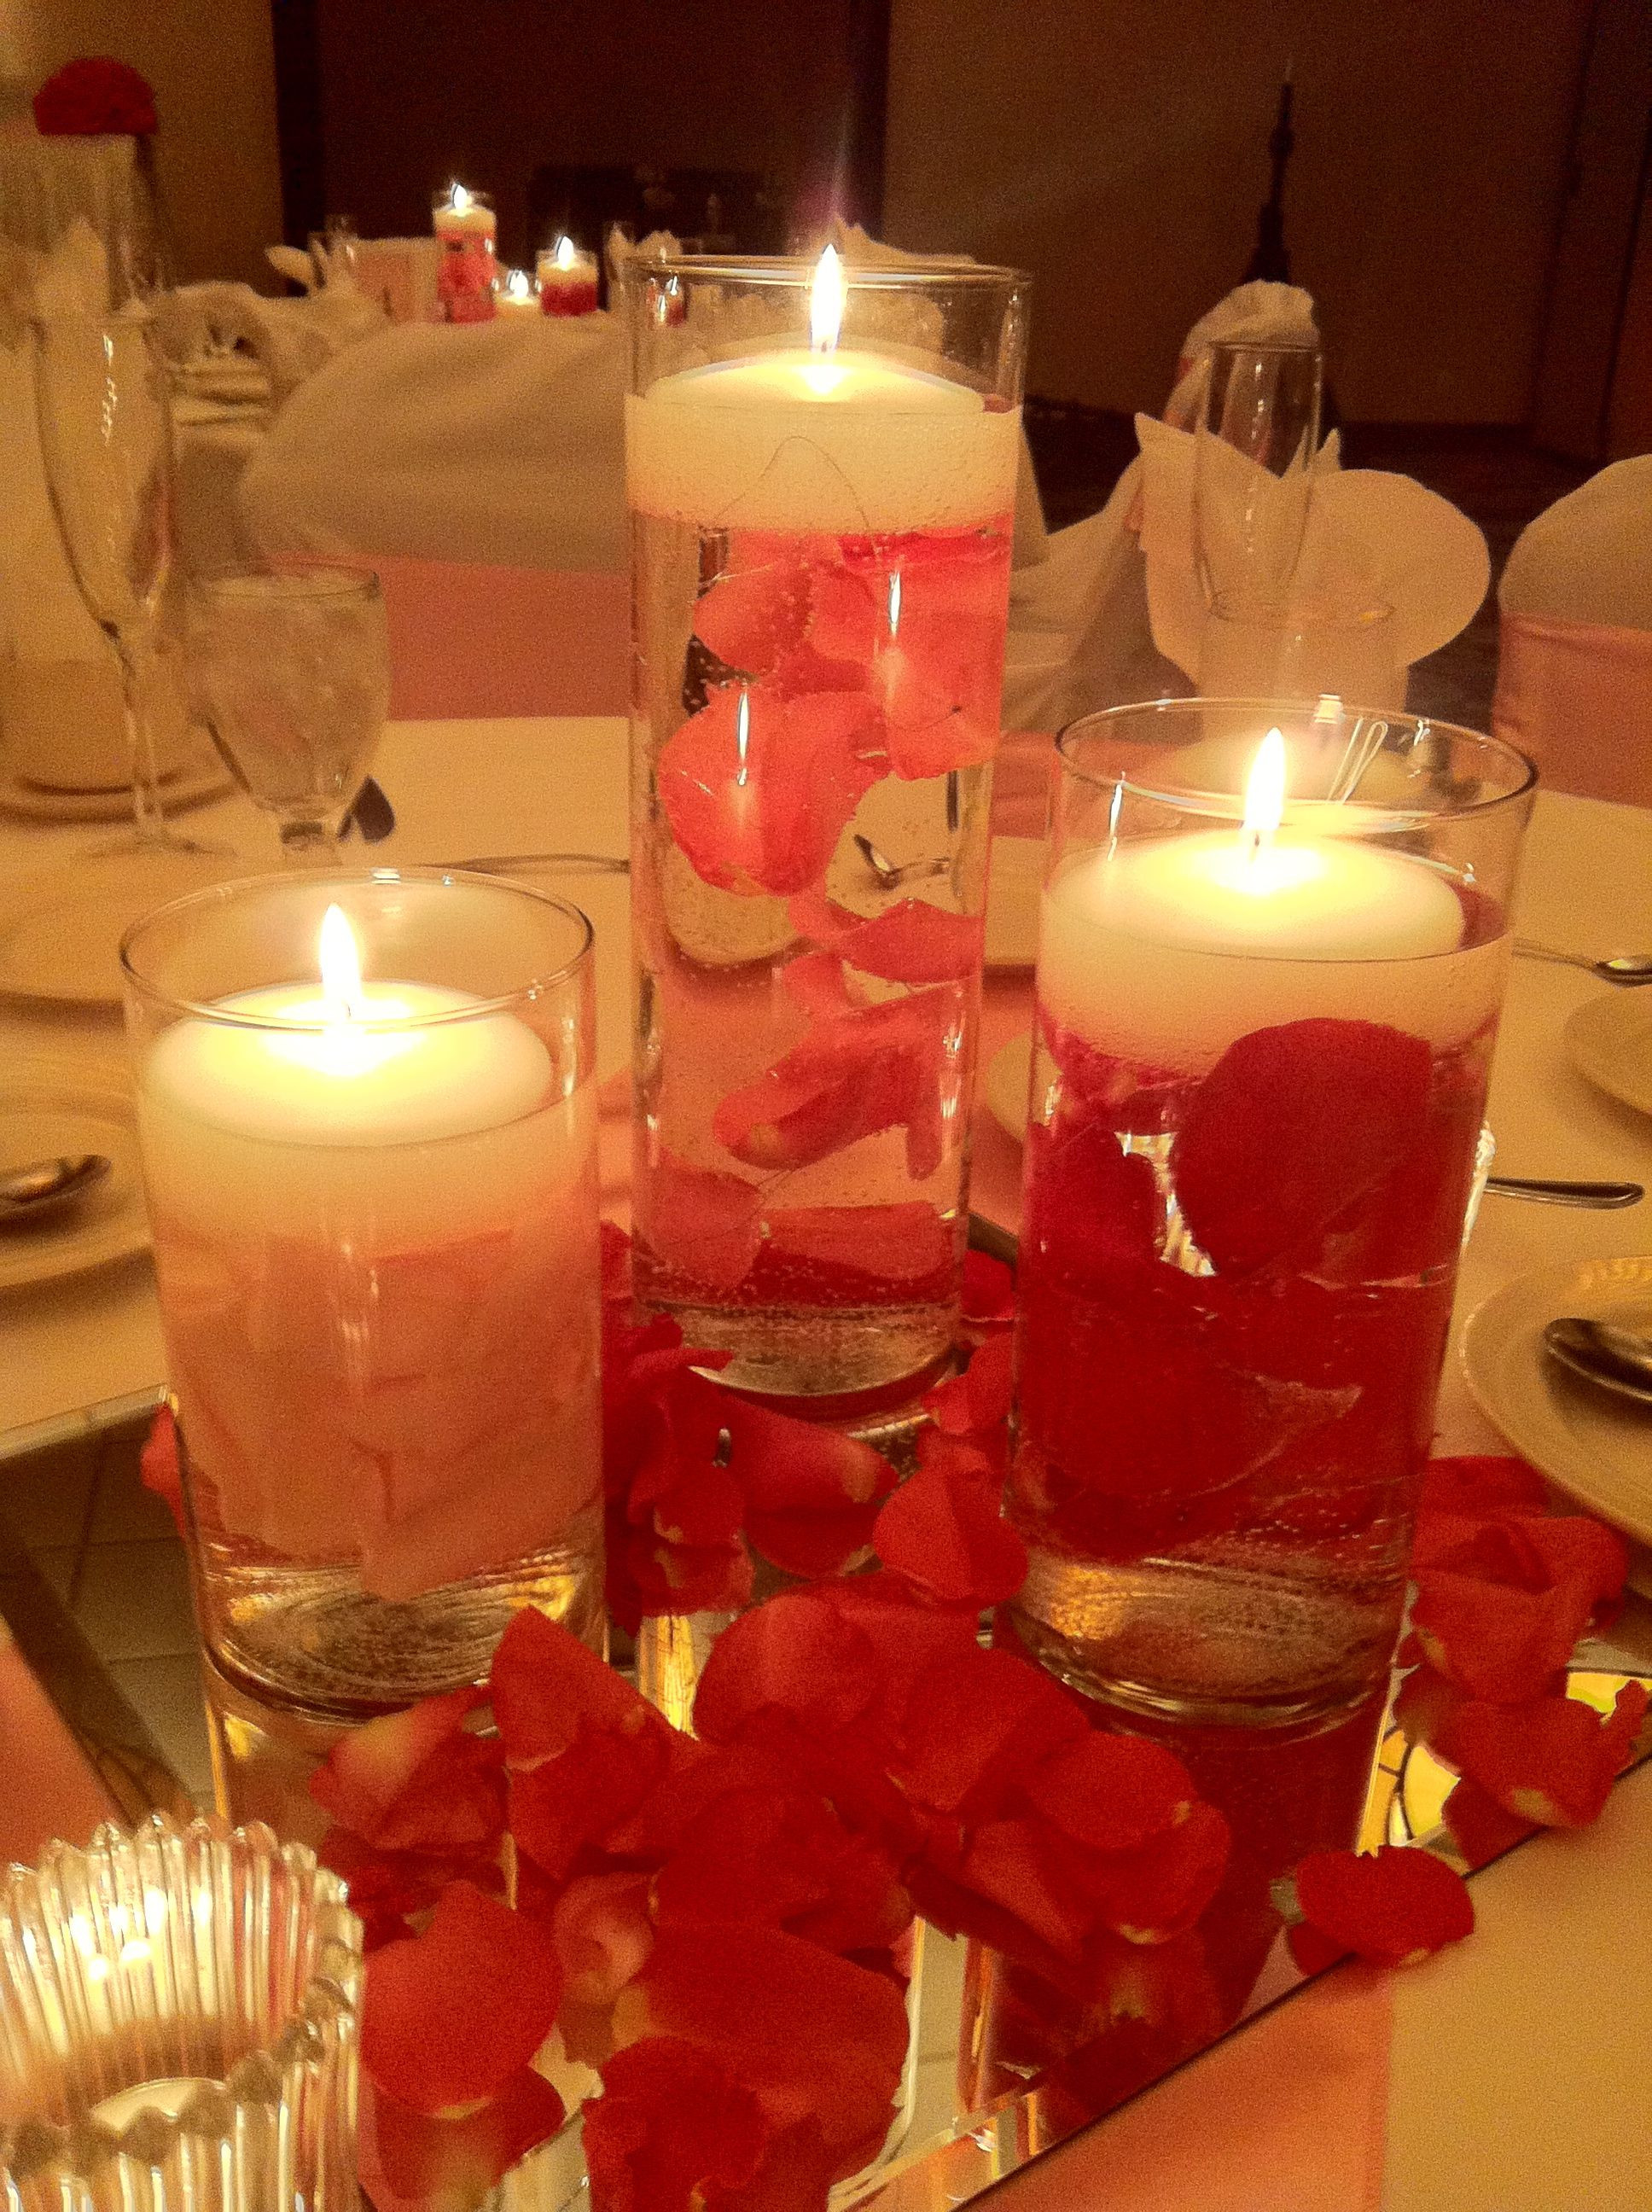 12 Unique Wedding Centerpieces Vases Floating Candles 2024 free download wedding centerpieces vases floating candles of floating rose petal centerpiece cylinder centerpieces candles pertaining to floating rose petal centerpiece cylinder centerpieces candles